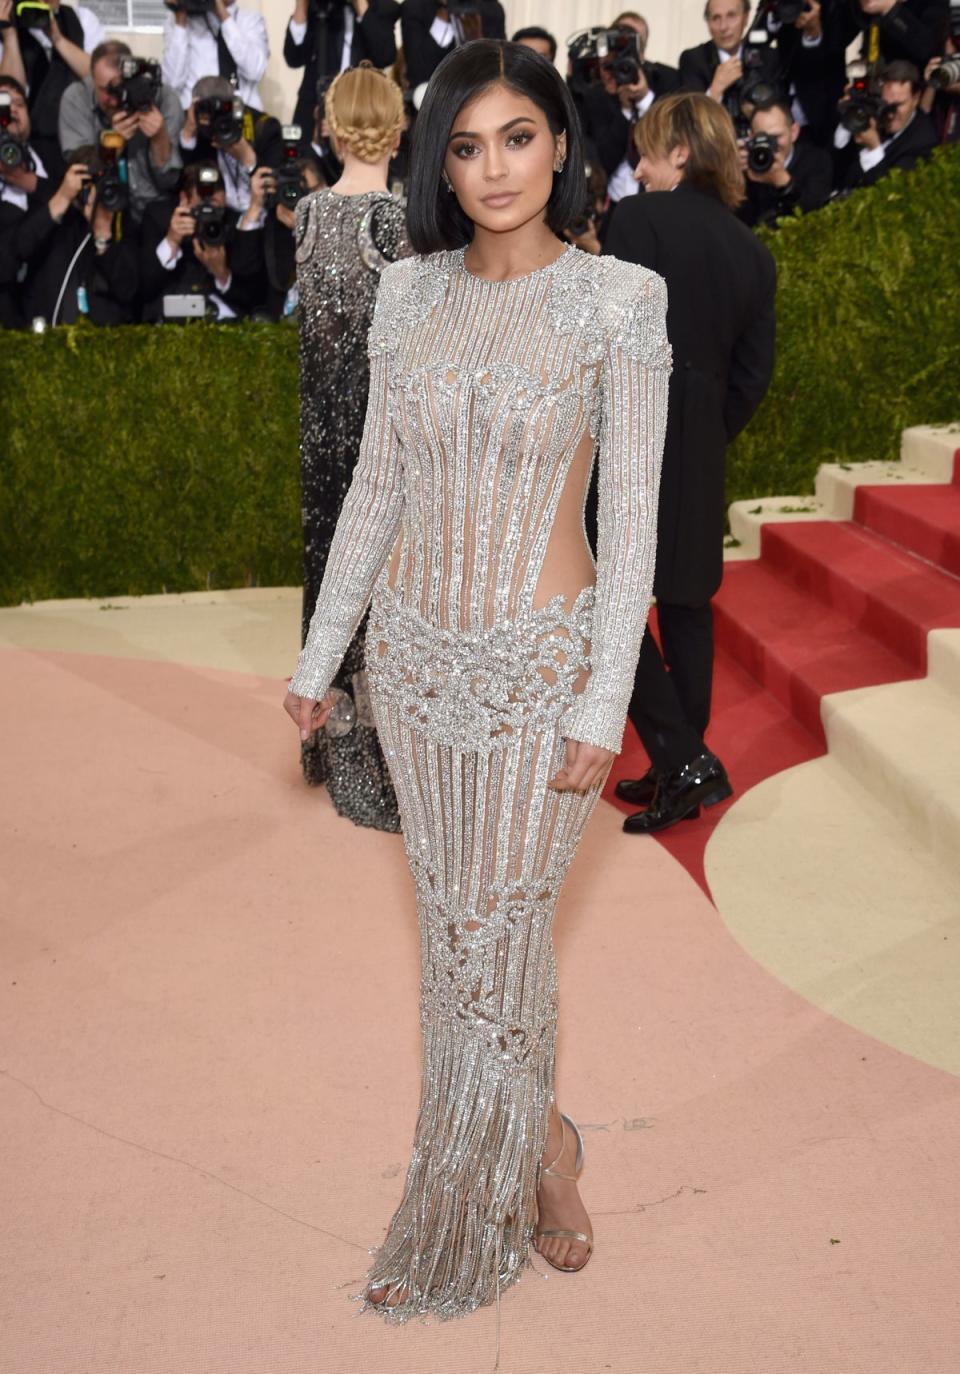 Kylie Jenner at the Met Gala 2016 (Getty Images)